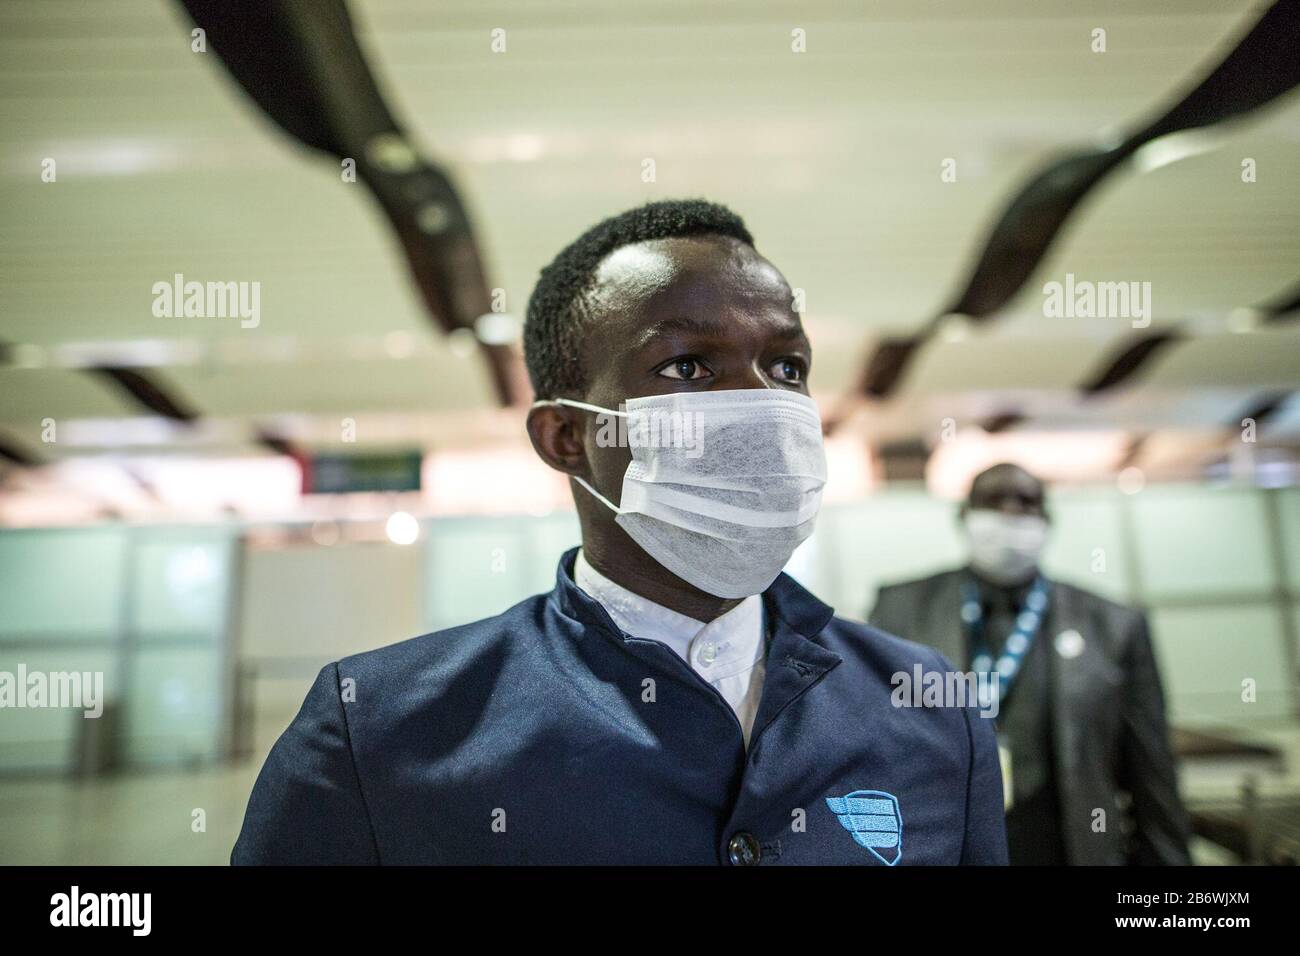 Dakar. 10th Mar, 2020. Photo taken on March 10, 2020 shows an airport employee wearing face mask in Dakar, Senegal. Senegalese Ministry of Health and Social Action confirmed the country's fifth case of the COVID-19 on Wednesday. In order to prevent more cases from entering Senegal, the authorities of Blaise Diagne International Airport, under the guideline of Senegalese Ministry of Health and Social Action, have intensified all the necessary measures to detect cases of the novel coronavirus. Credit: Eddy Peters/Xinhua/Alamy Live News Stock Photo